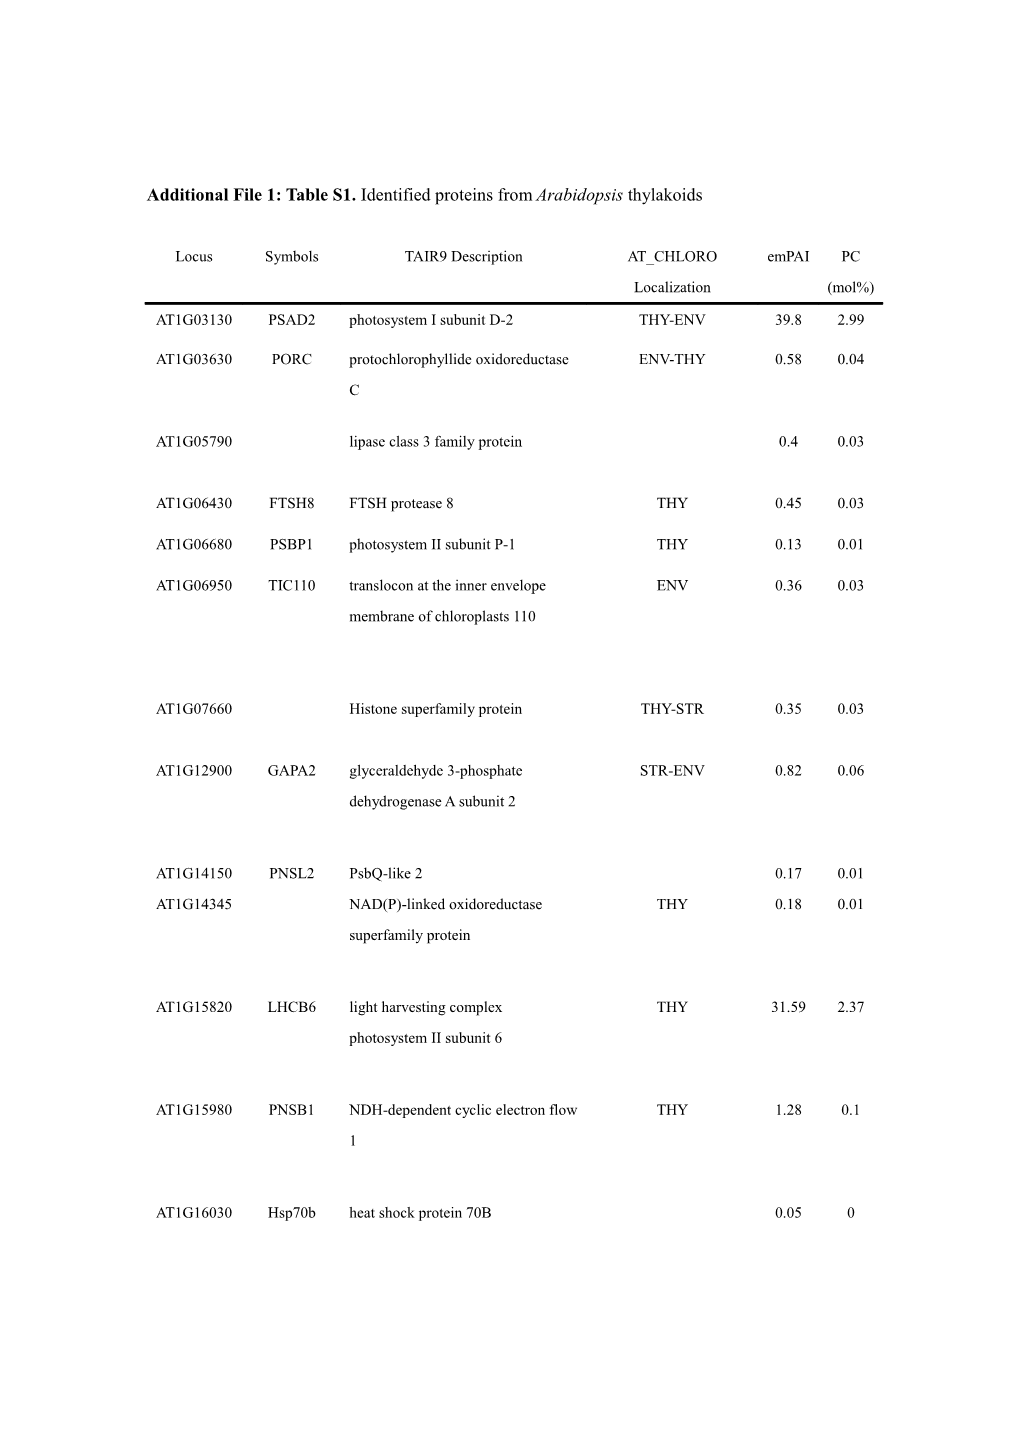 Additional File 1: Table S1. Identified Proteins from Arabidopsis Thylakoids